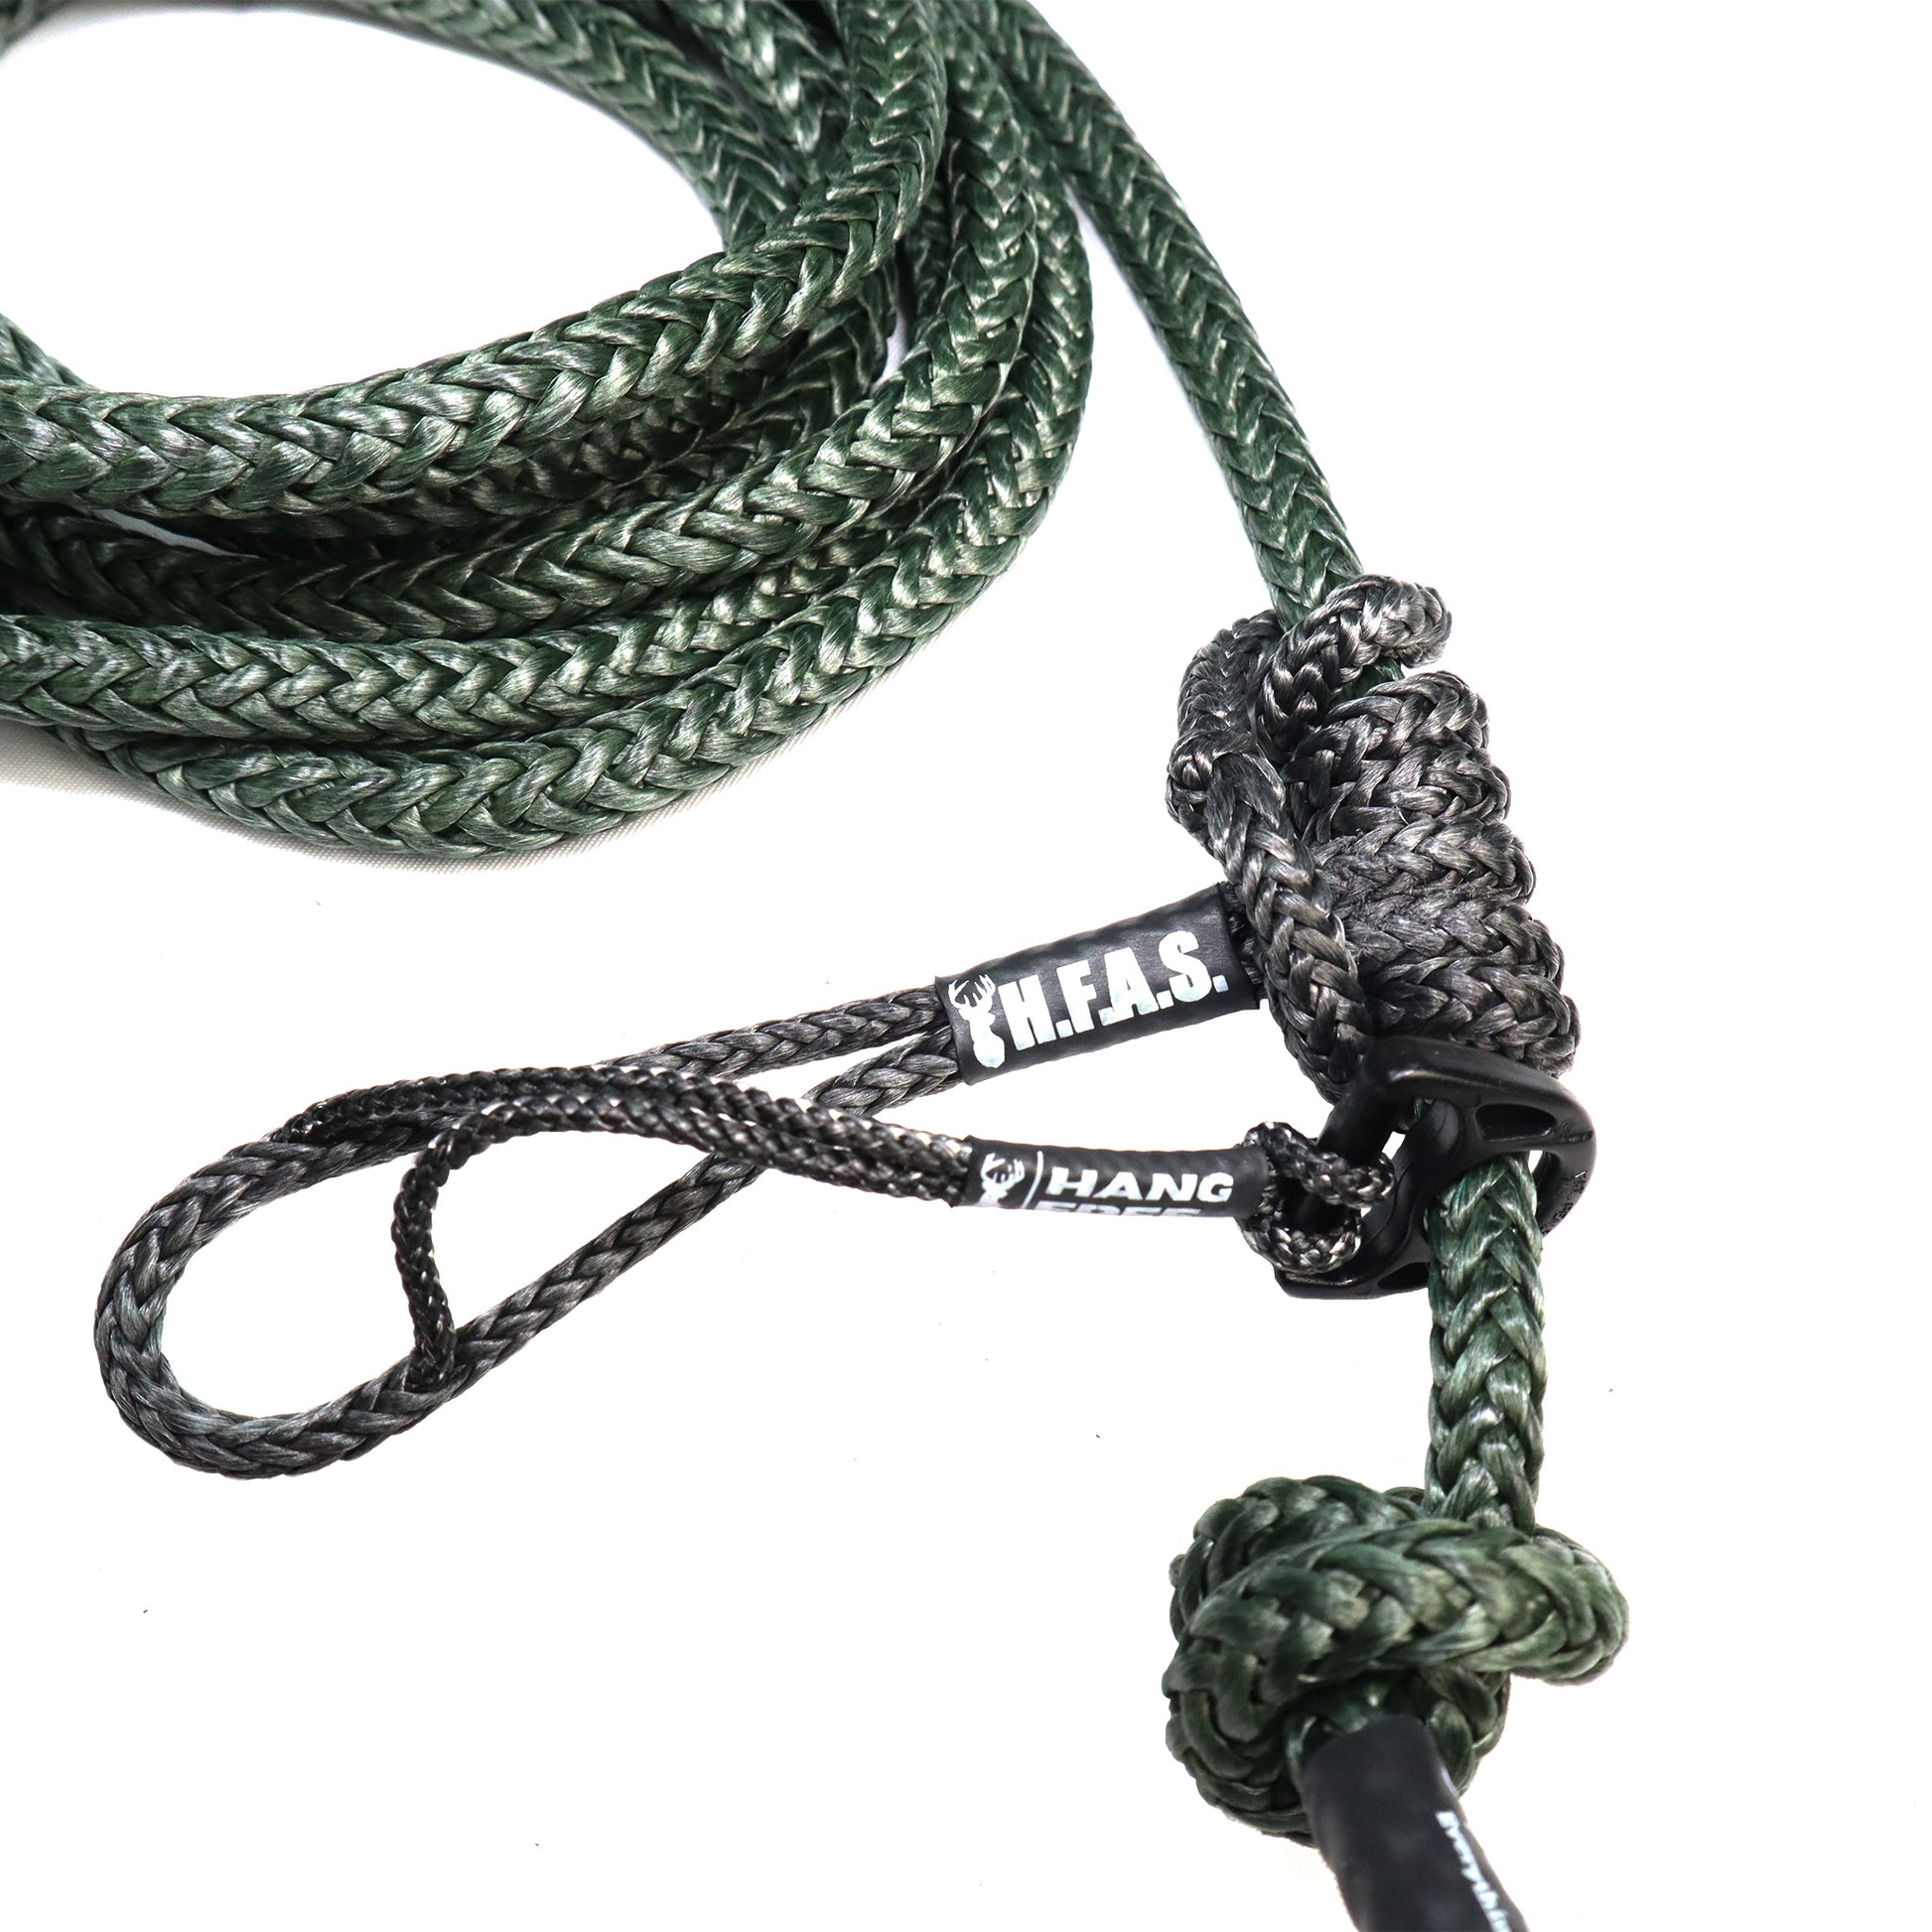 Olive Green 3/16 Hang Free Attachment System (H.F.A.S.) Blackout